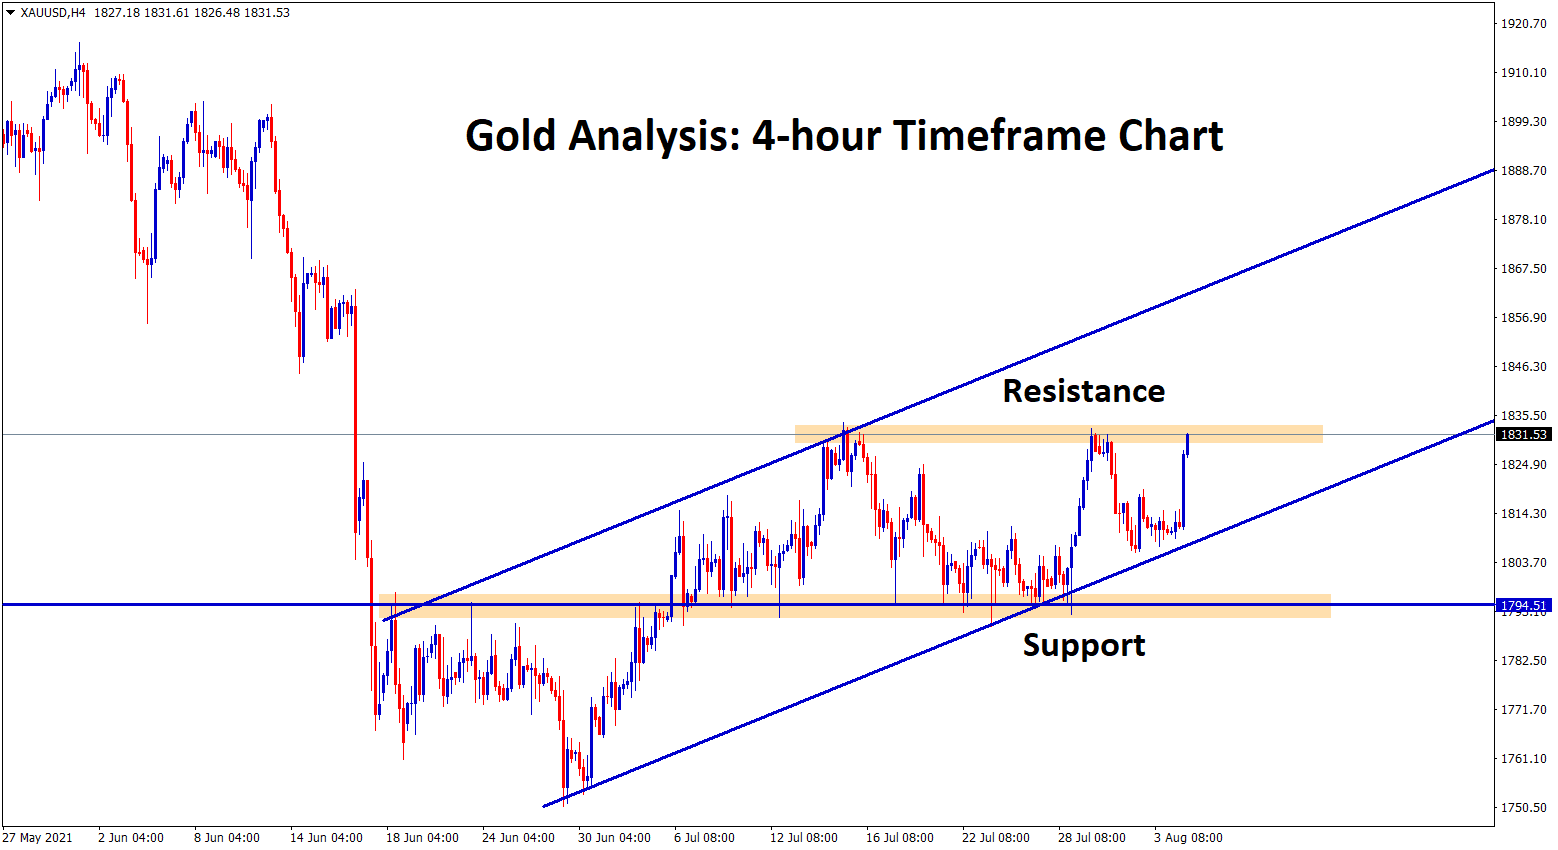 Gold has reached the horizontal resistance again from the support and higher low level of uptrend line